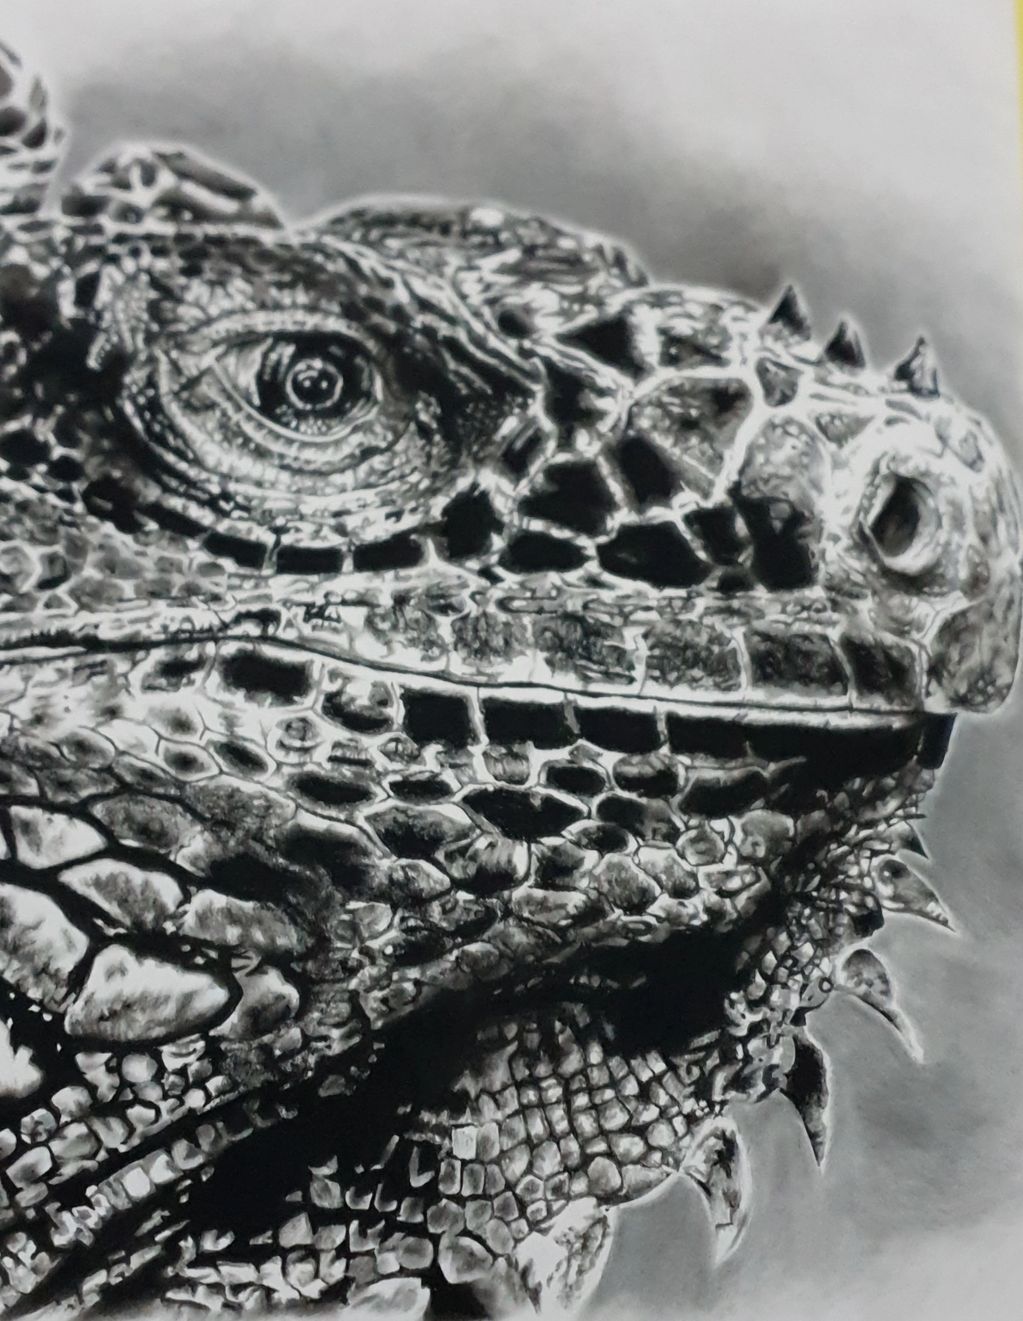 A2 Pencil and Charcoal drawing of an Iguana Lizard.